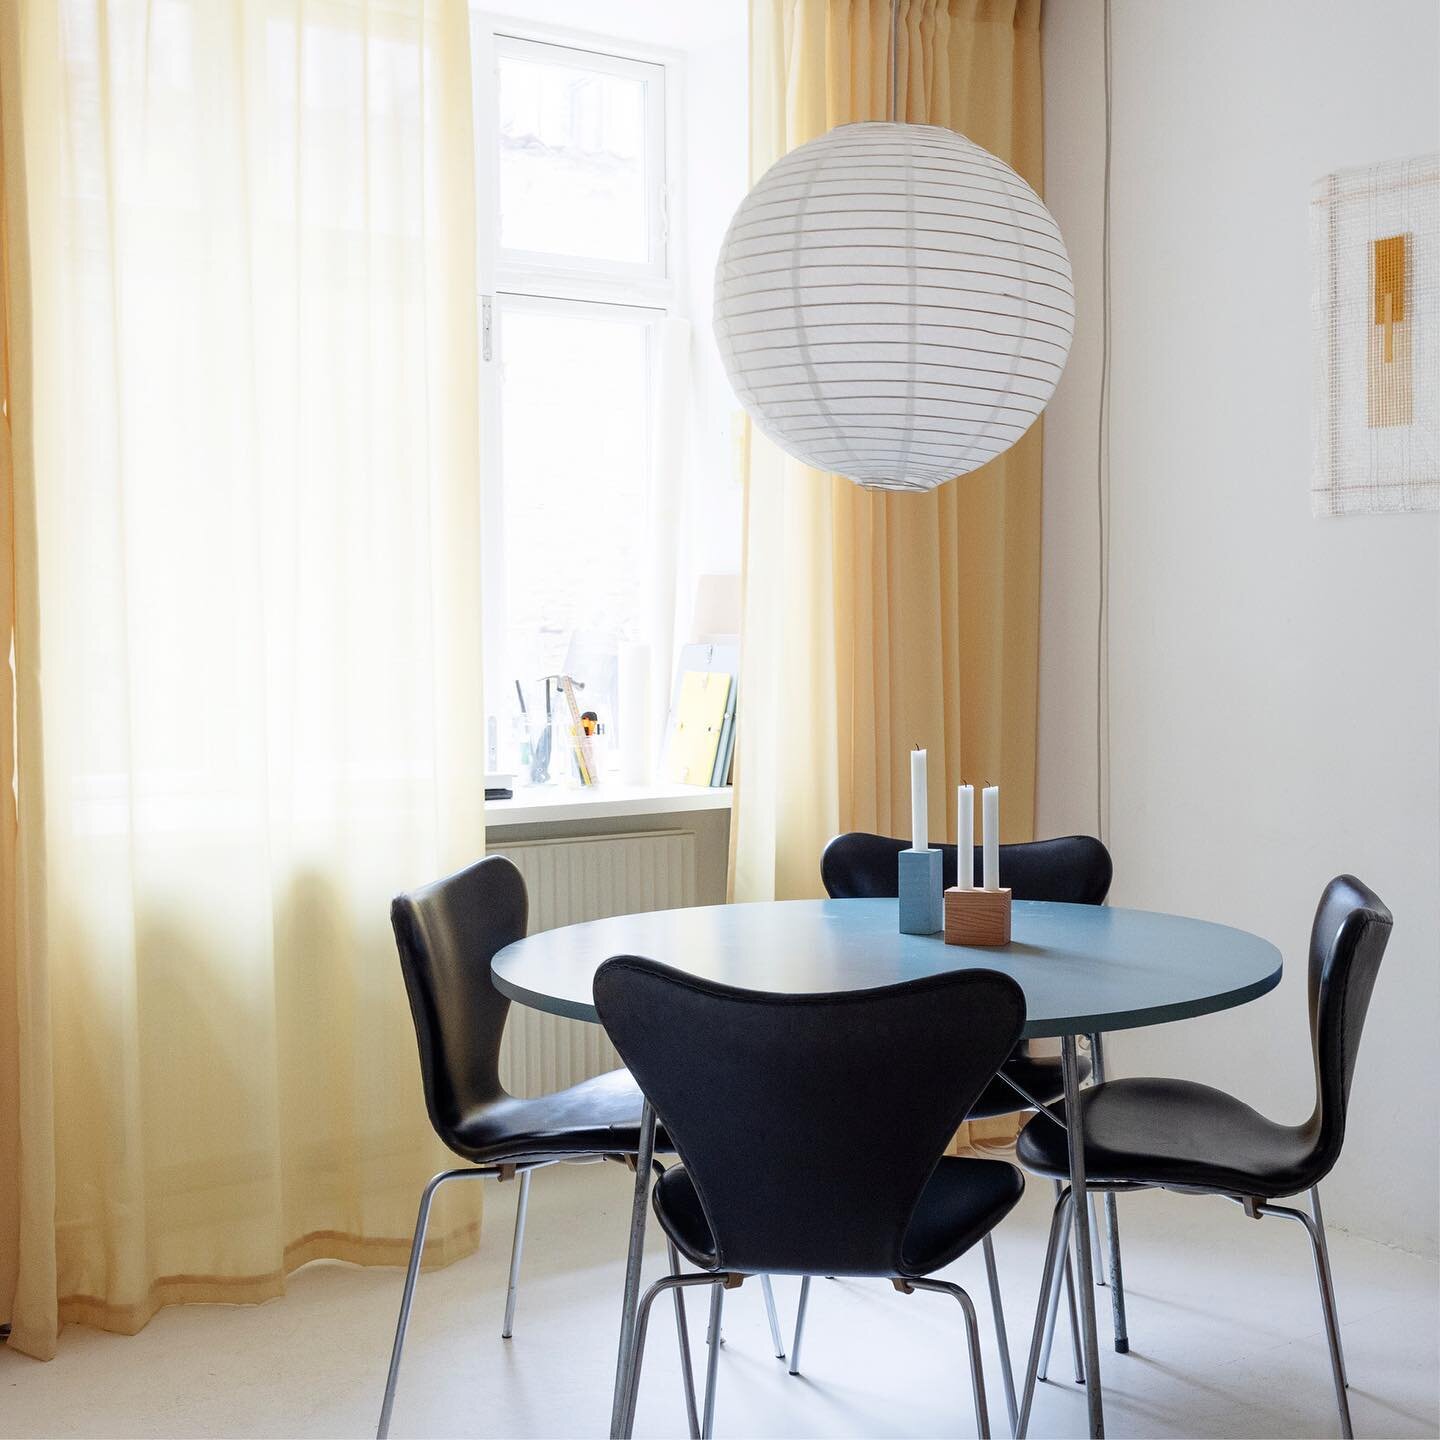 My small N&oslash;rrebro apartment in last weeks @politiken 💛

The place is minimalistic and colorful - and all furniture, except my dining chairs, are made by me.
If you are looking for an interior design solution or a customized piece of furniture